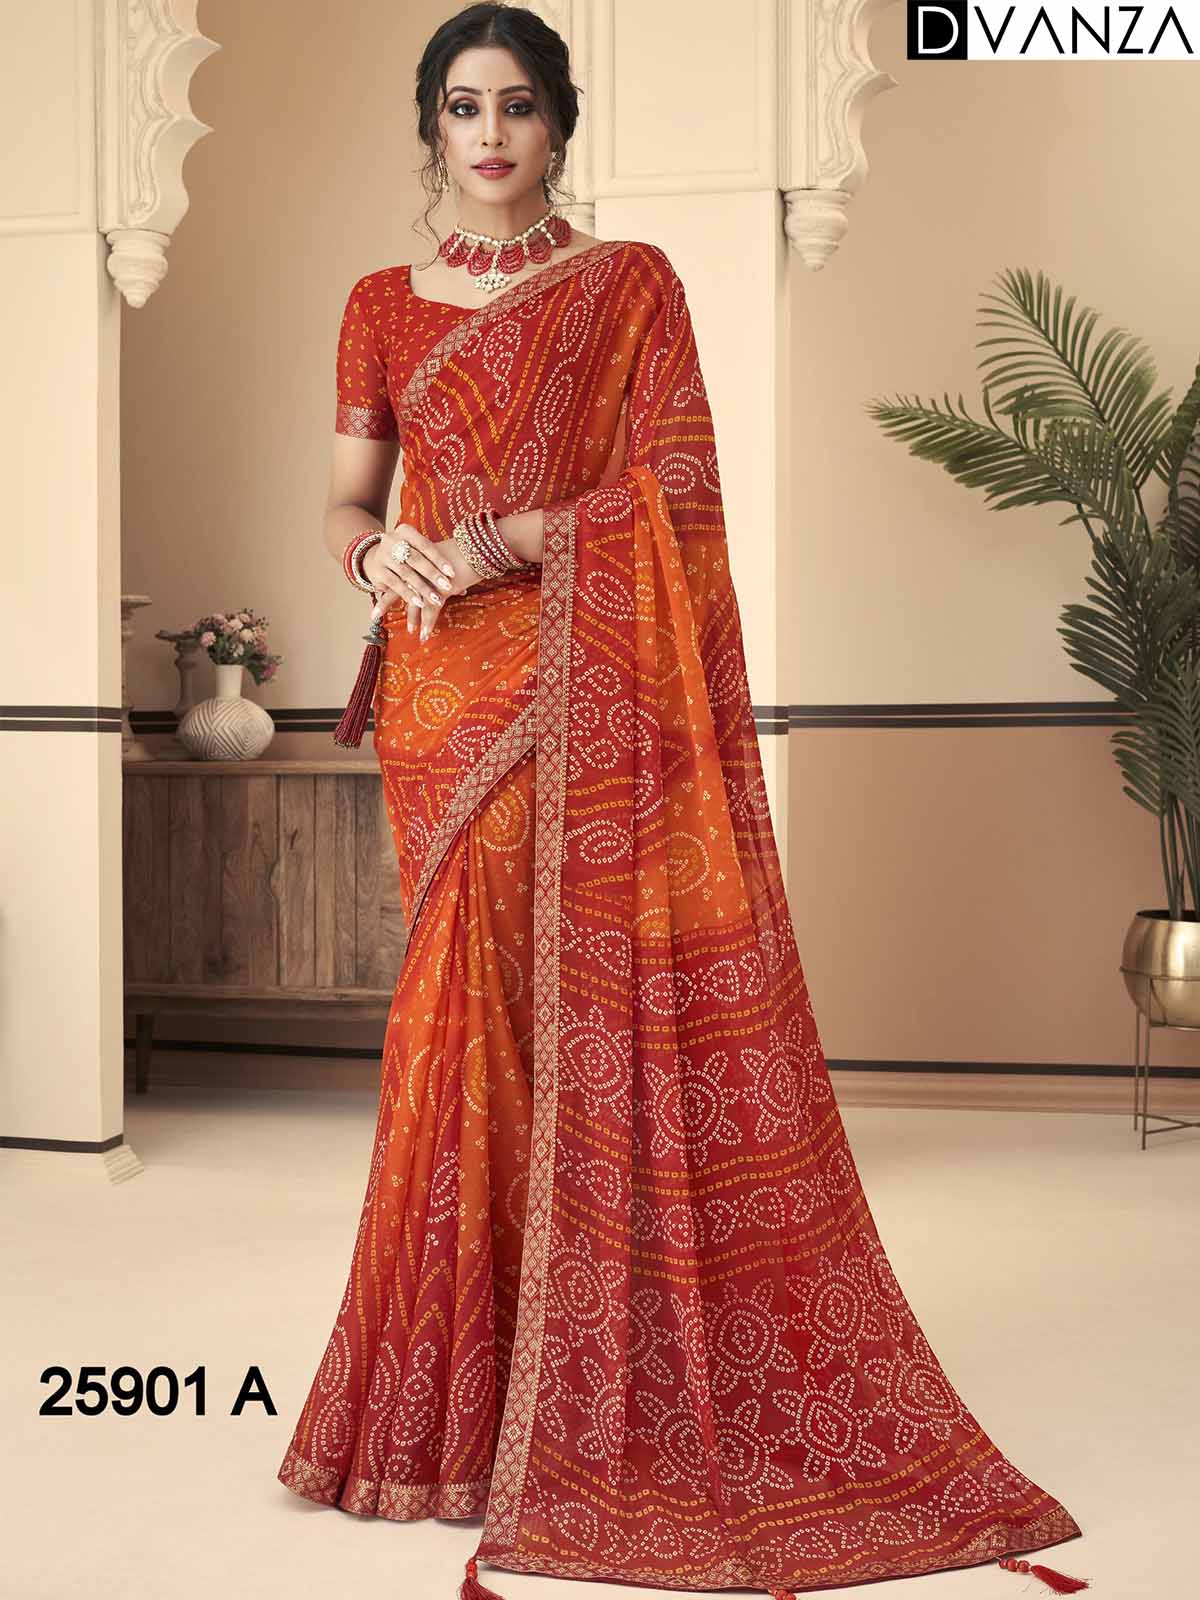 Buy Bandhani Printed Chiffon Saree with Attached Border, Jari, and Tassels Online in Best Quality - dvz0003813